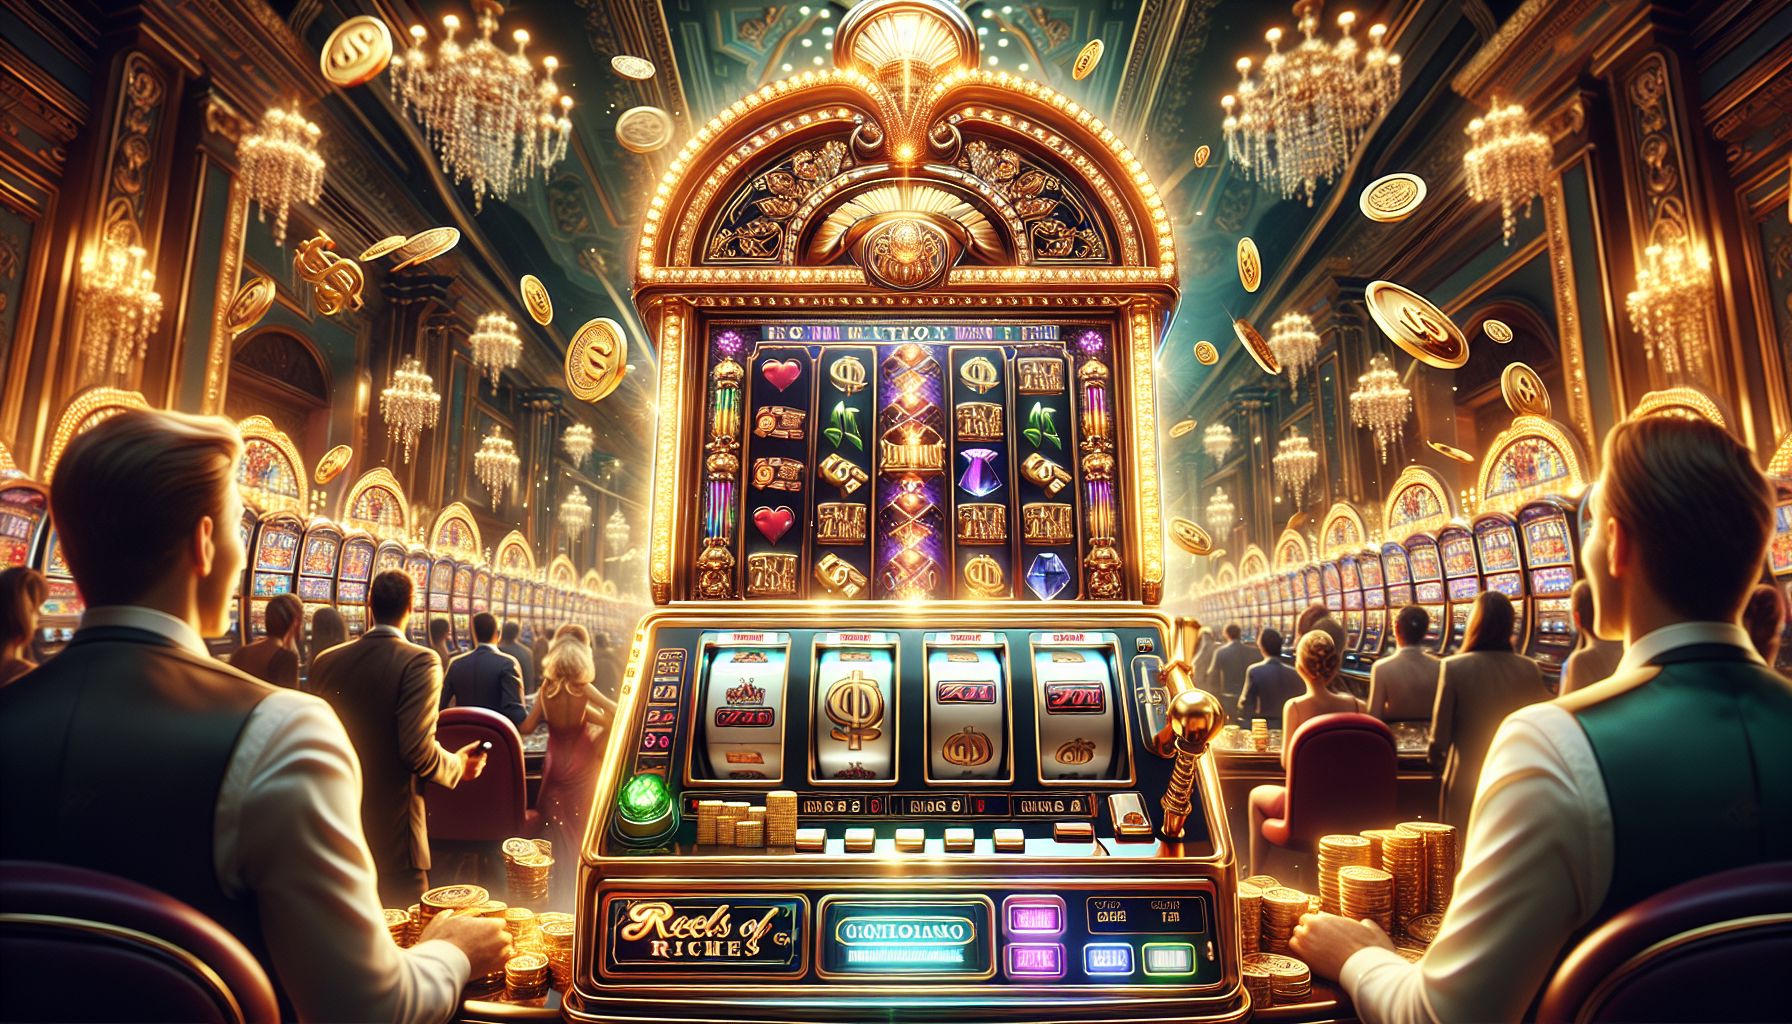 **Welcome to the Exciting World of Slot Spectacular: Reels of Riches!**